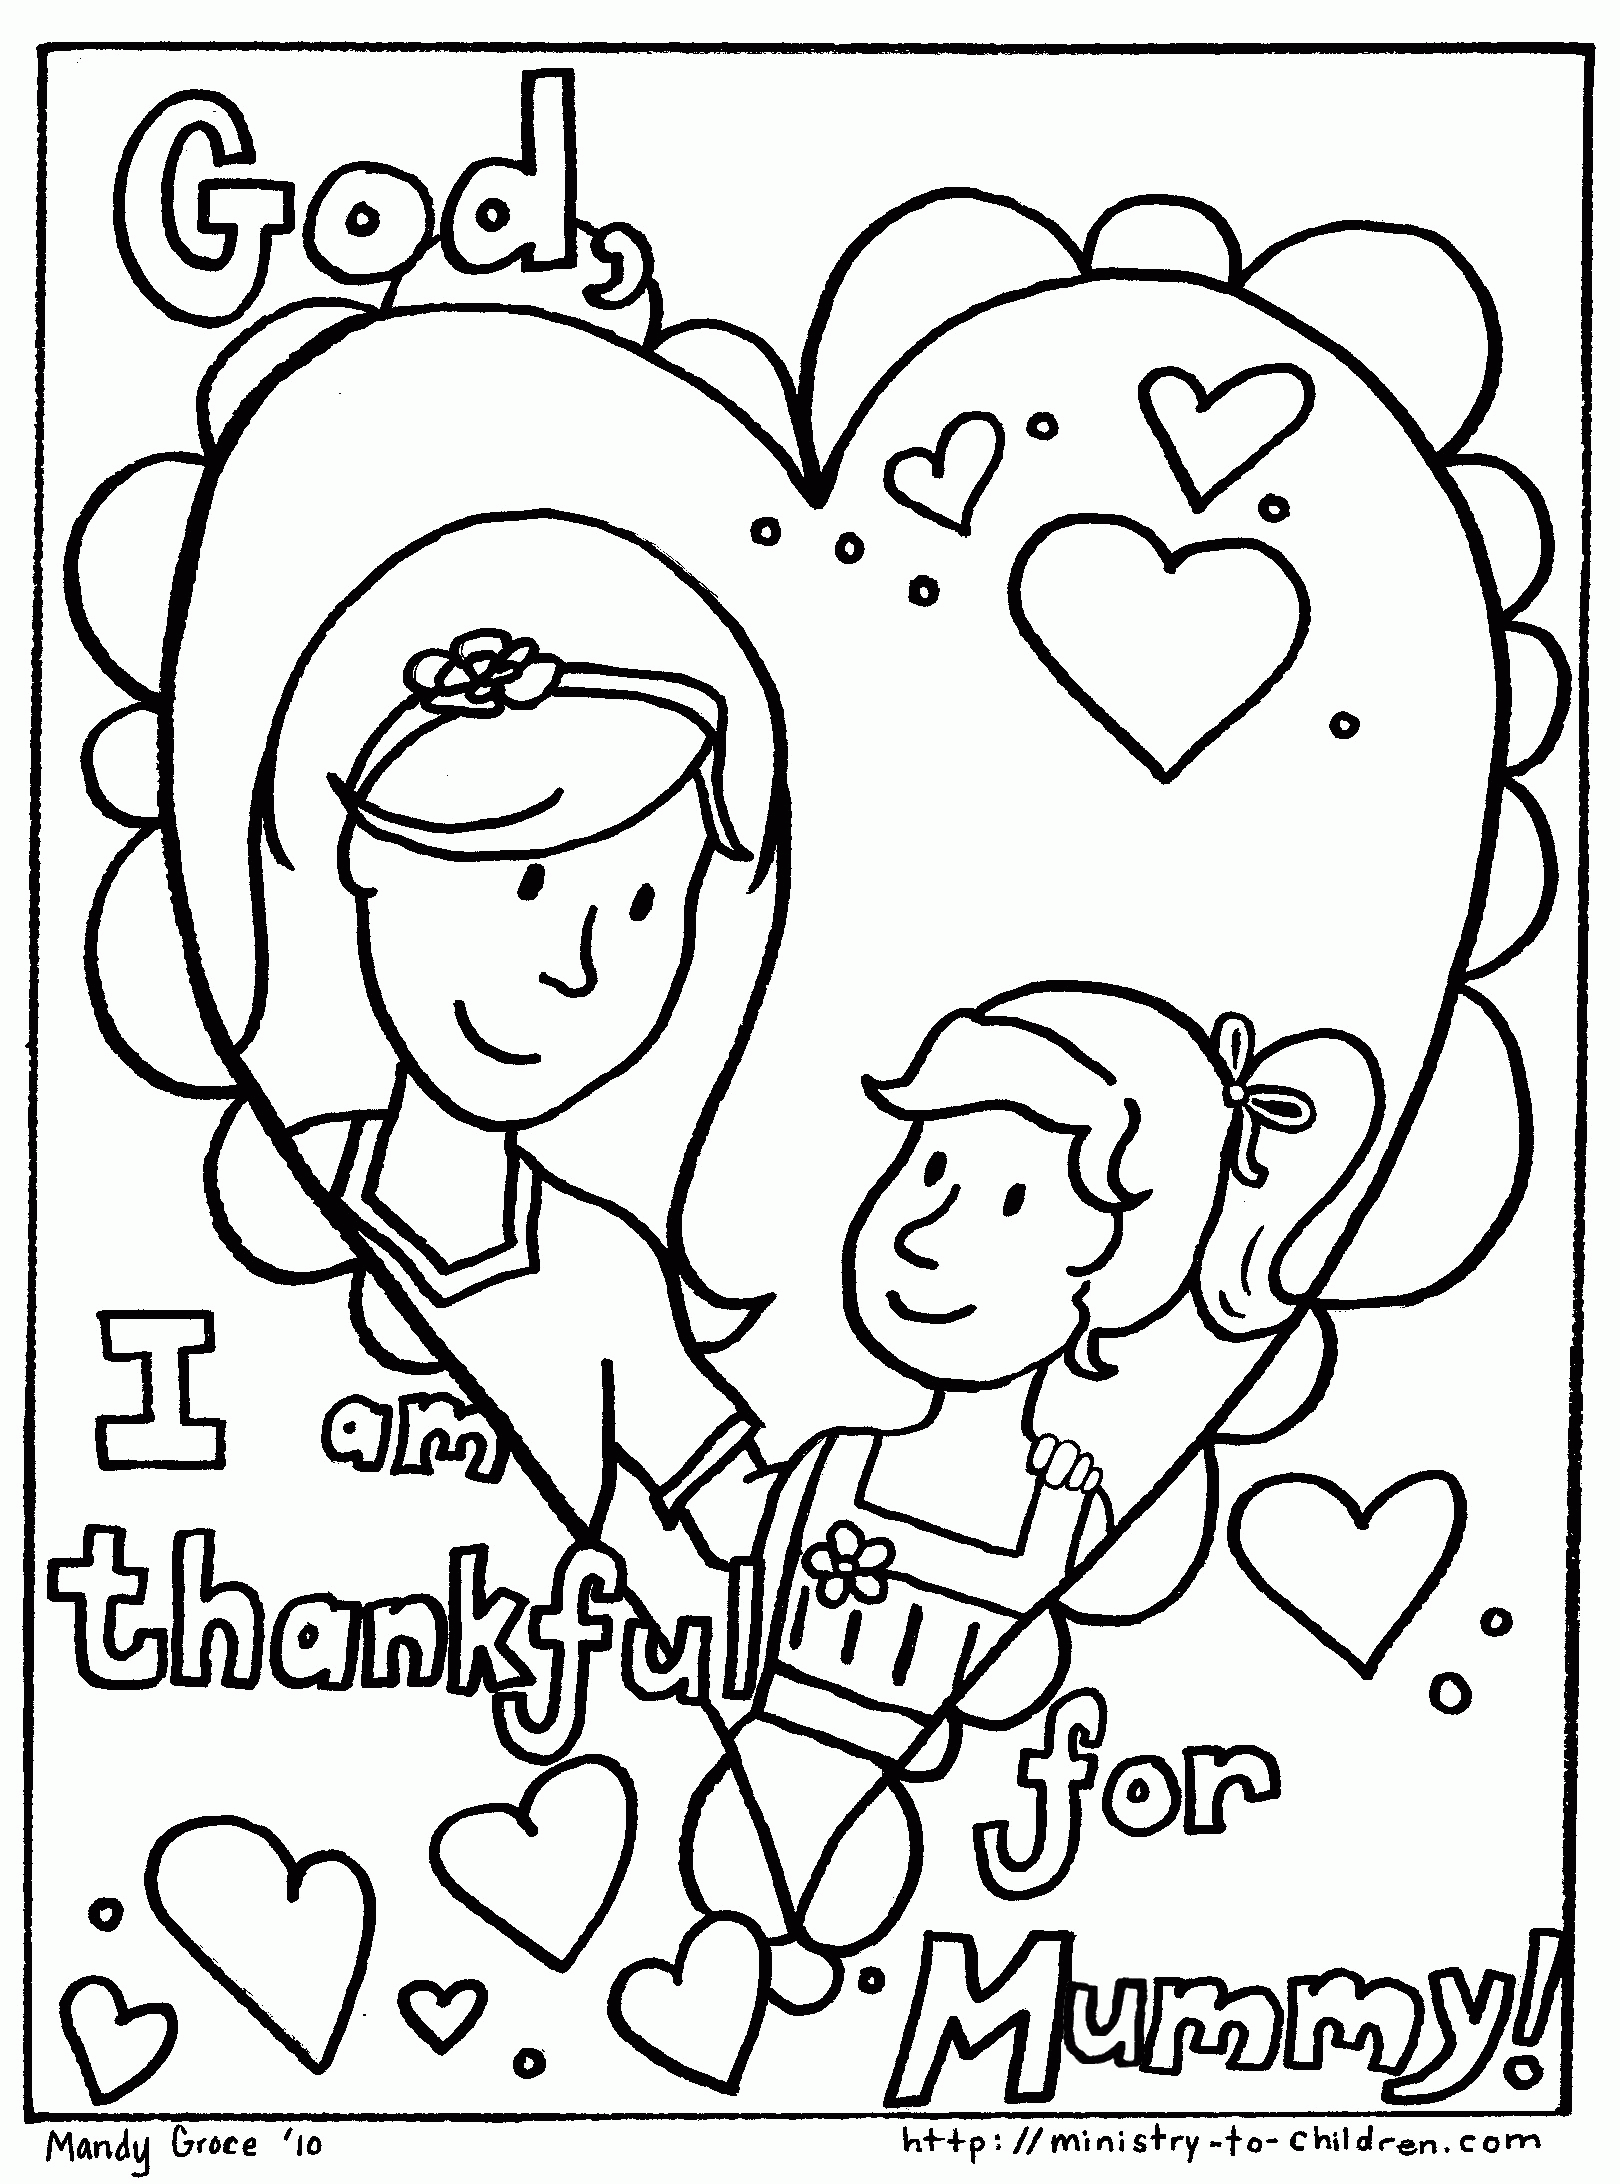 happy-birthday-mom-printable-coloring-pages-coloring-home